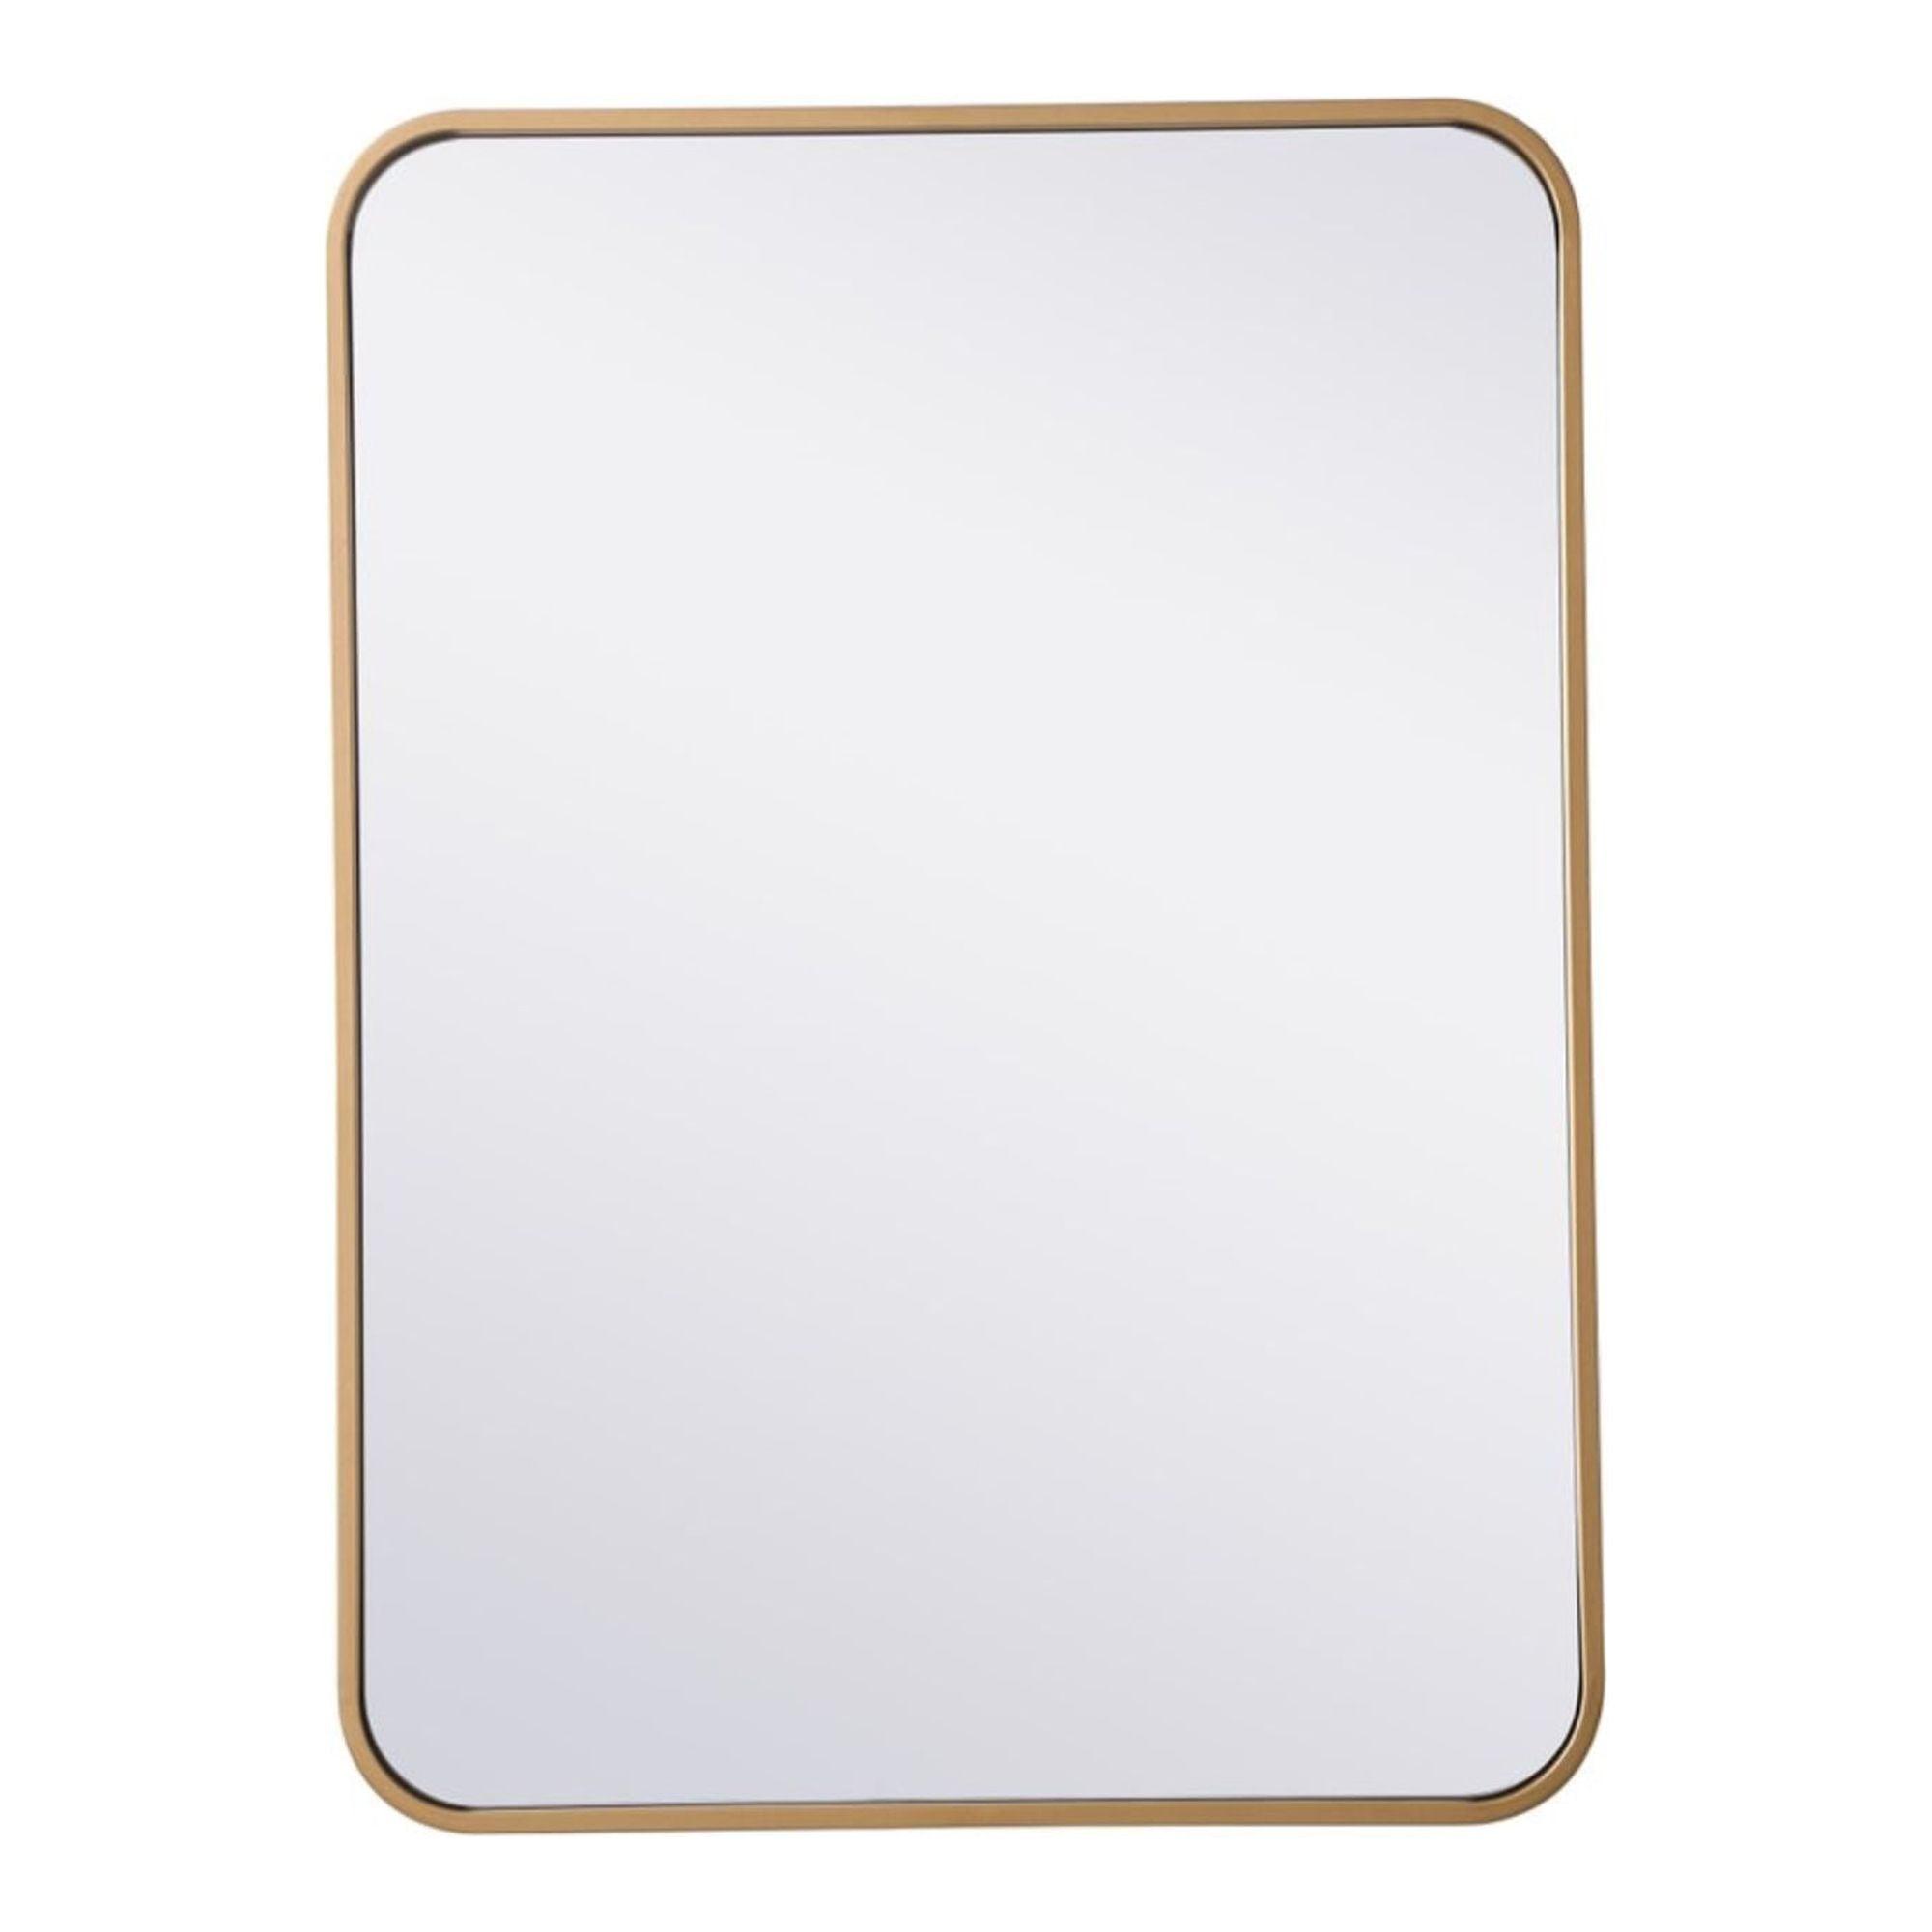 Evermore Contemporary 22x30 Inch Rectangular Wood Vanity Mirror in Gold